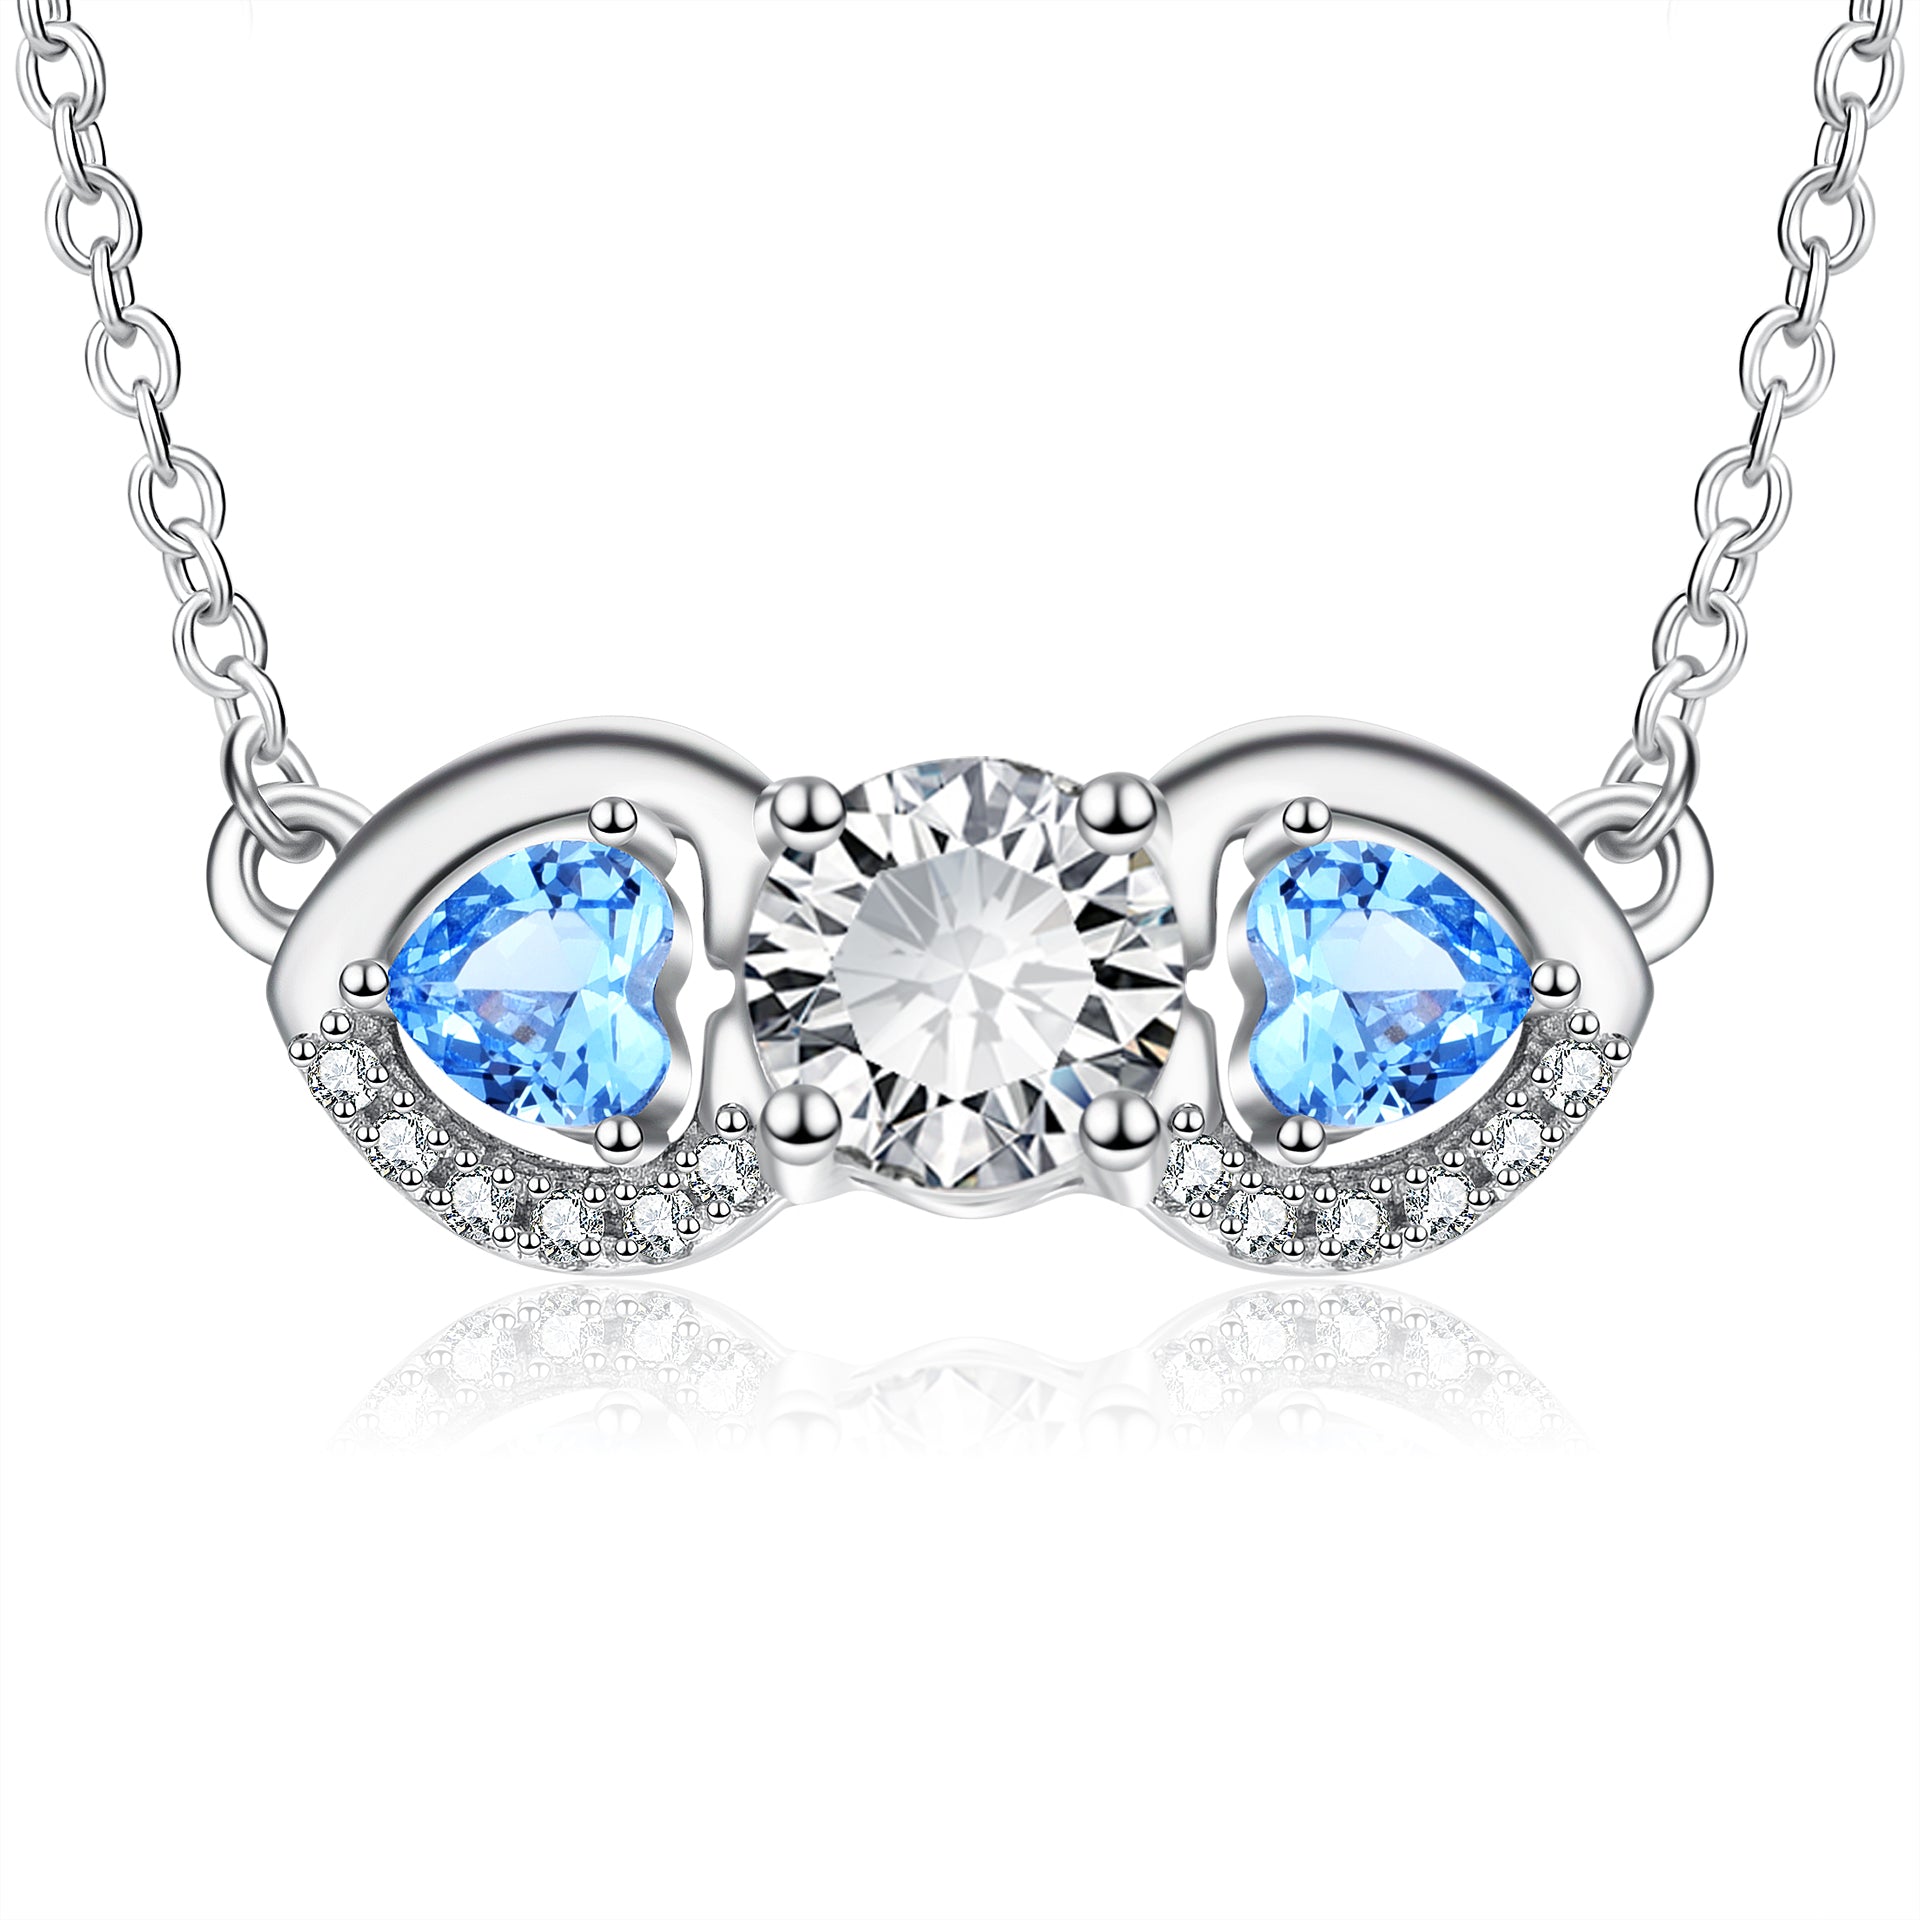 New Shiny Zircon Necklace Invisible Blue Gemstone Chain Pendant Necklace for Women Jewelry Gift